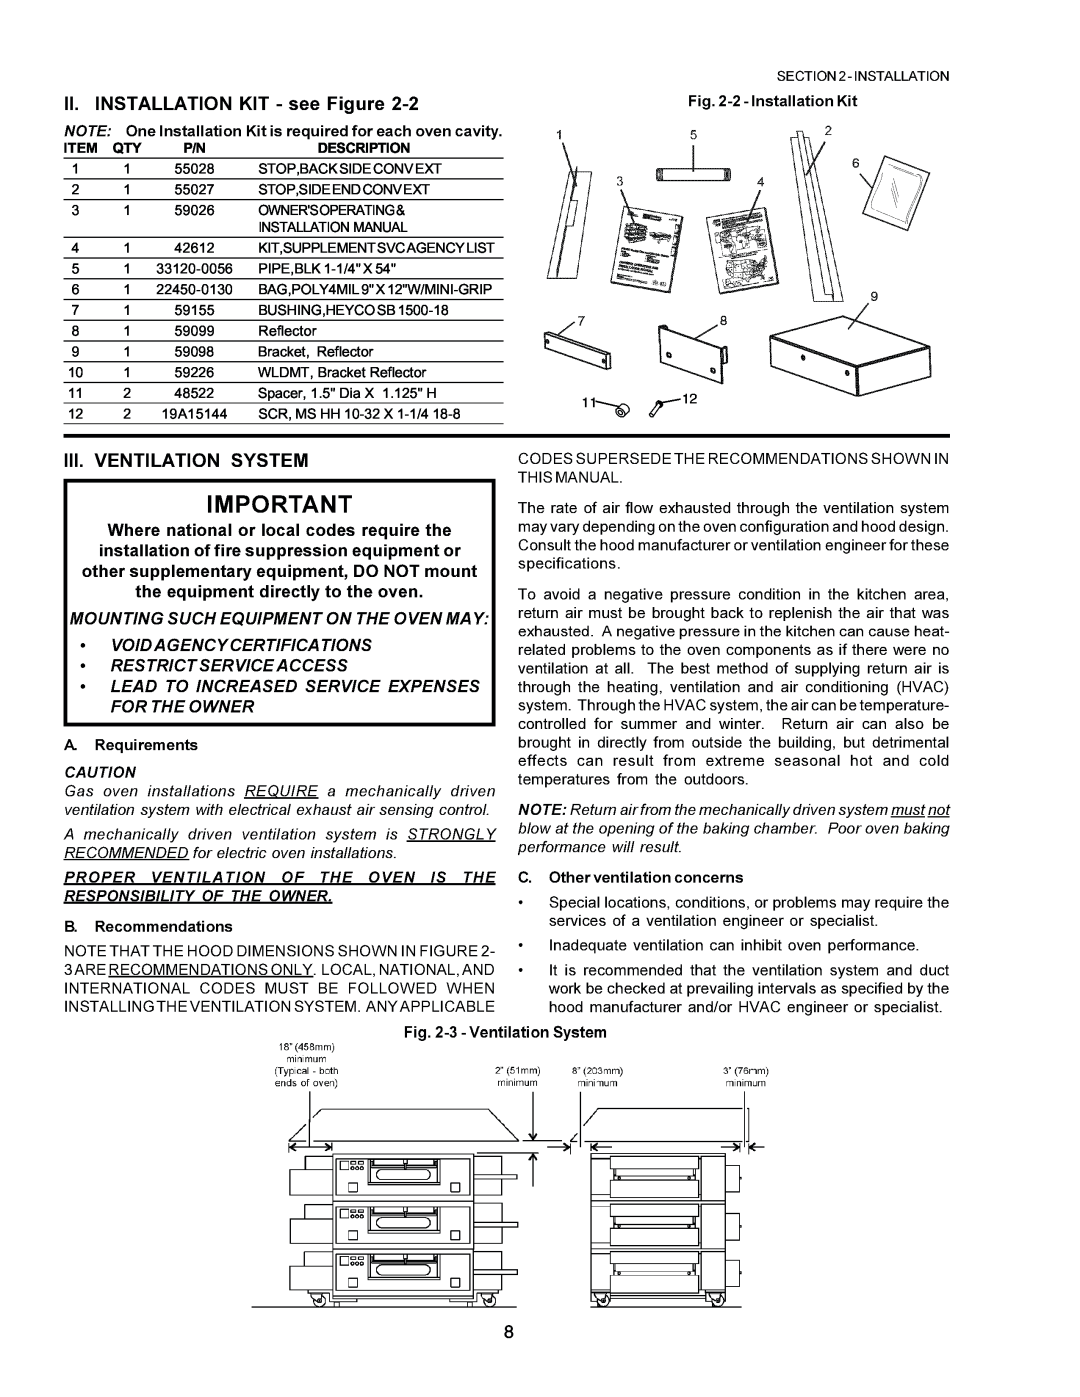 Middleby Cooking Systems Group PS870 Series manual Description 